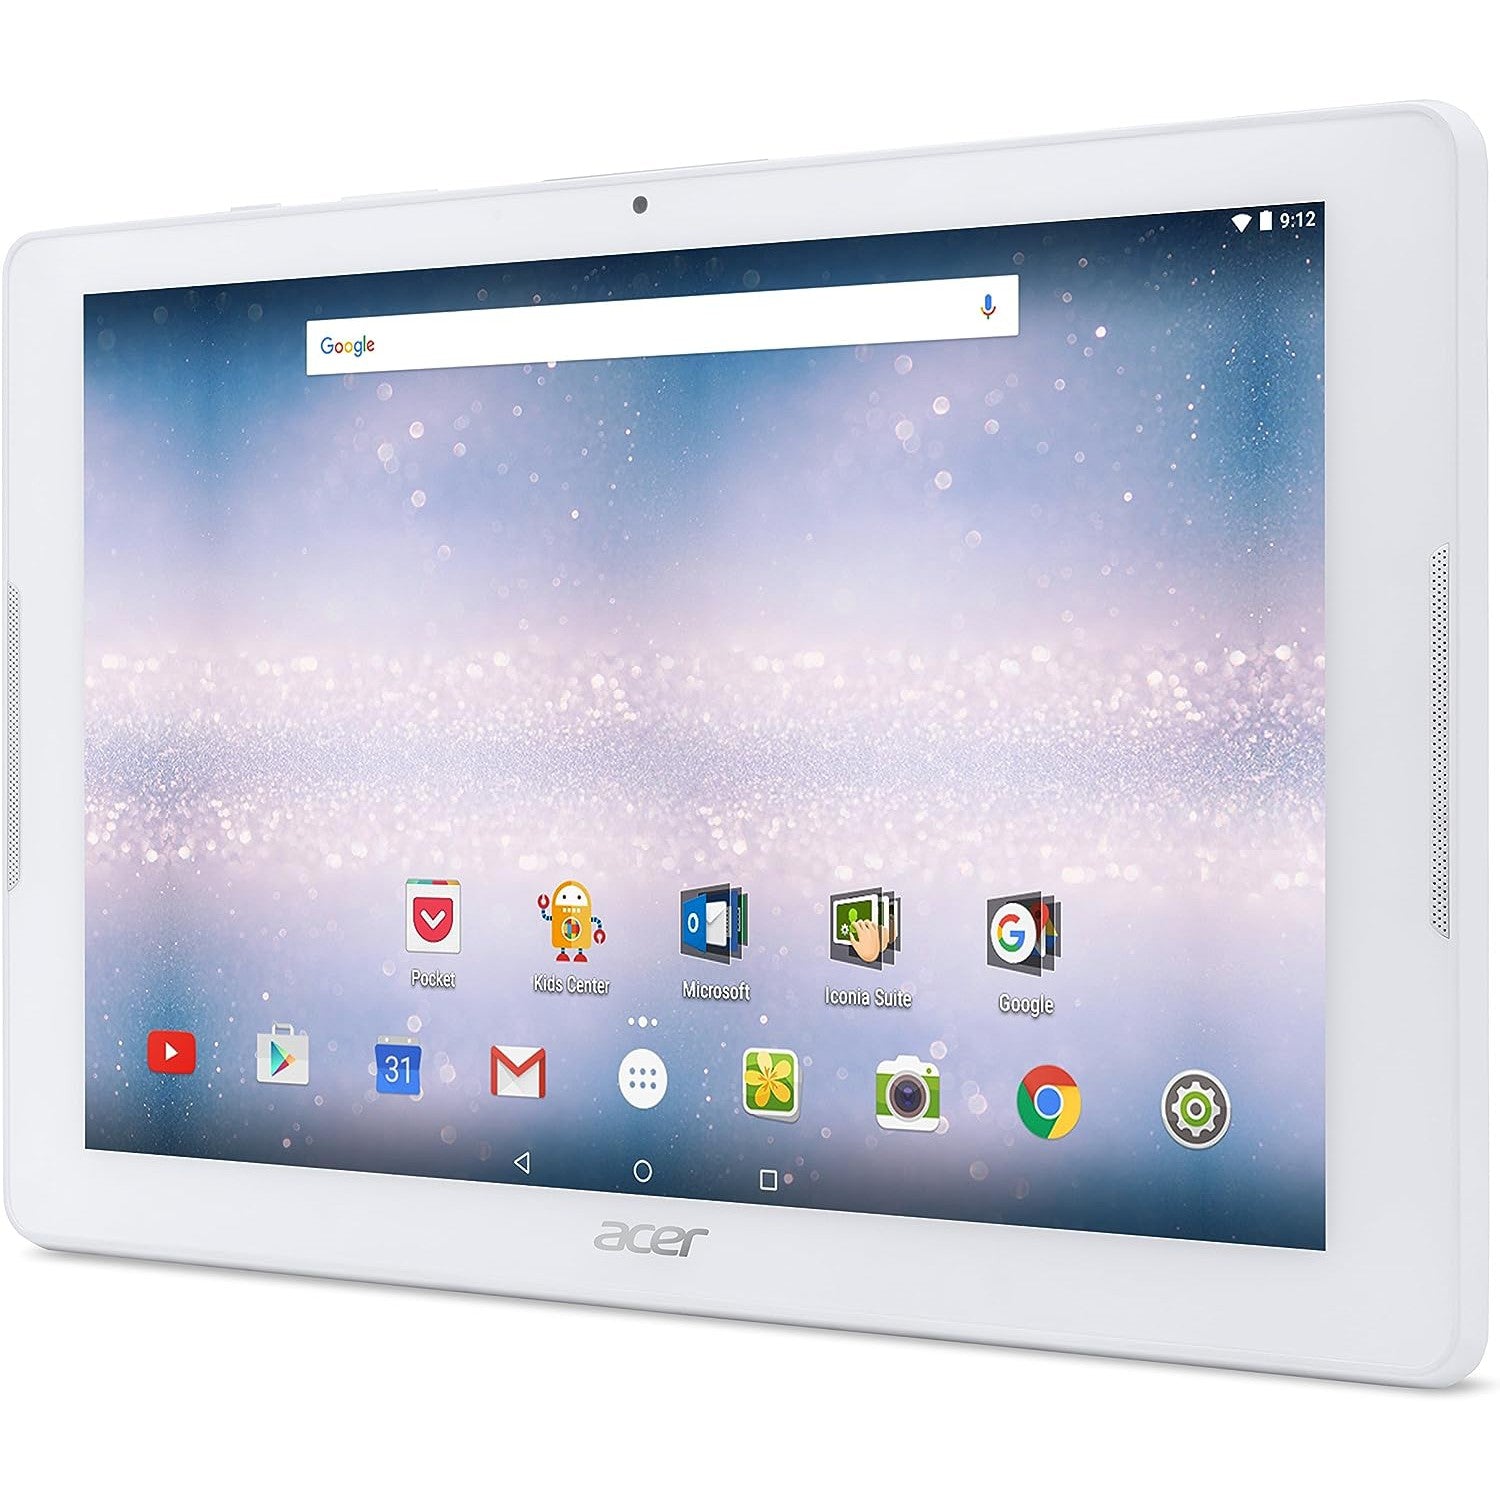 Acer Iconia Tab 10 A3-A30 16GB Tablet 7" - White